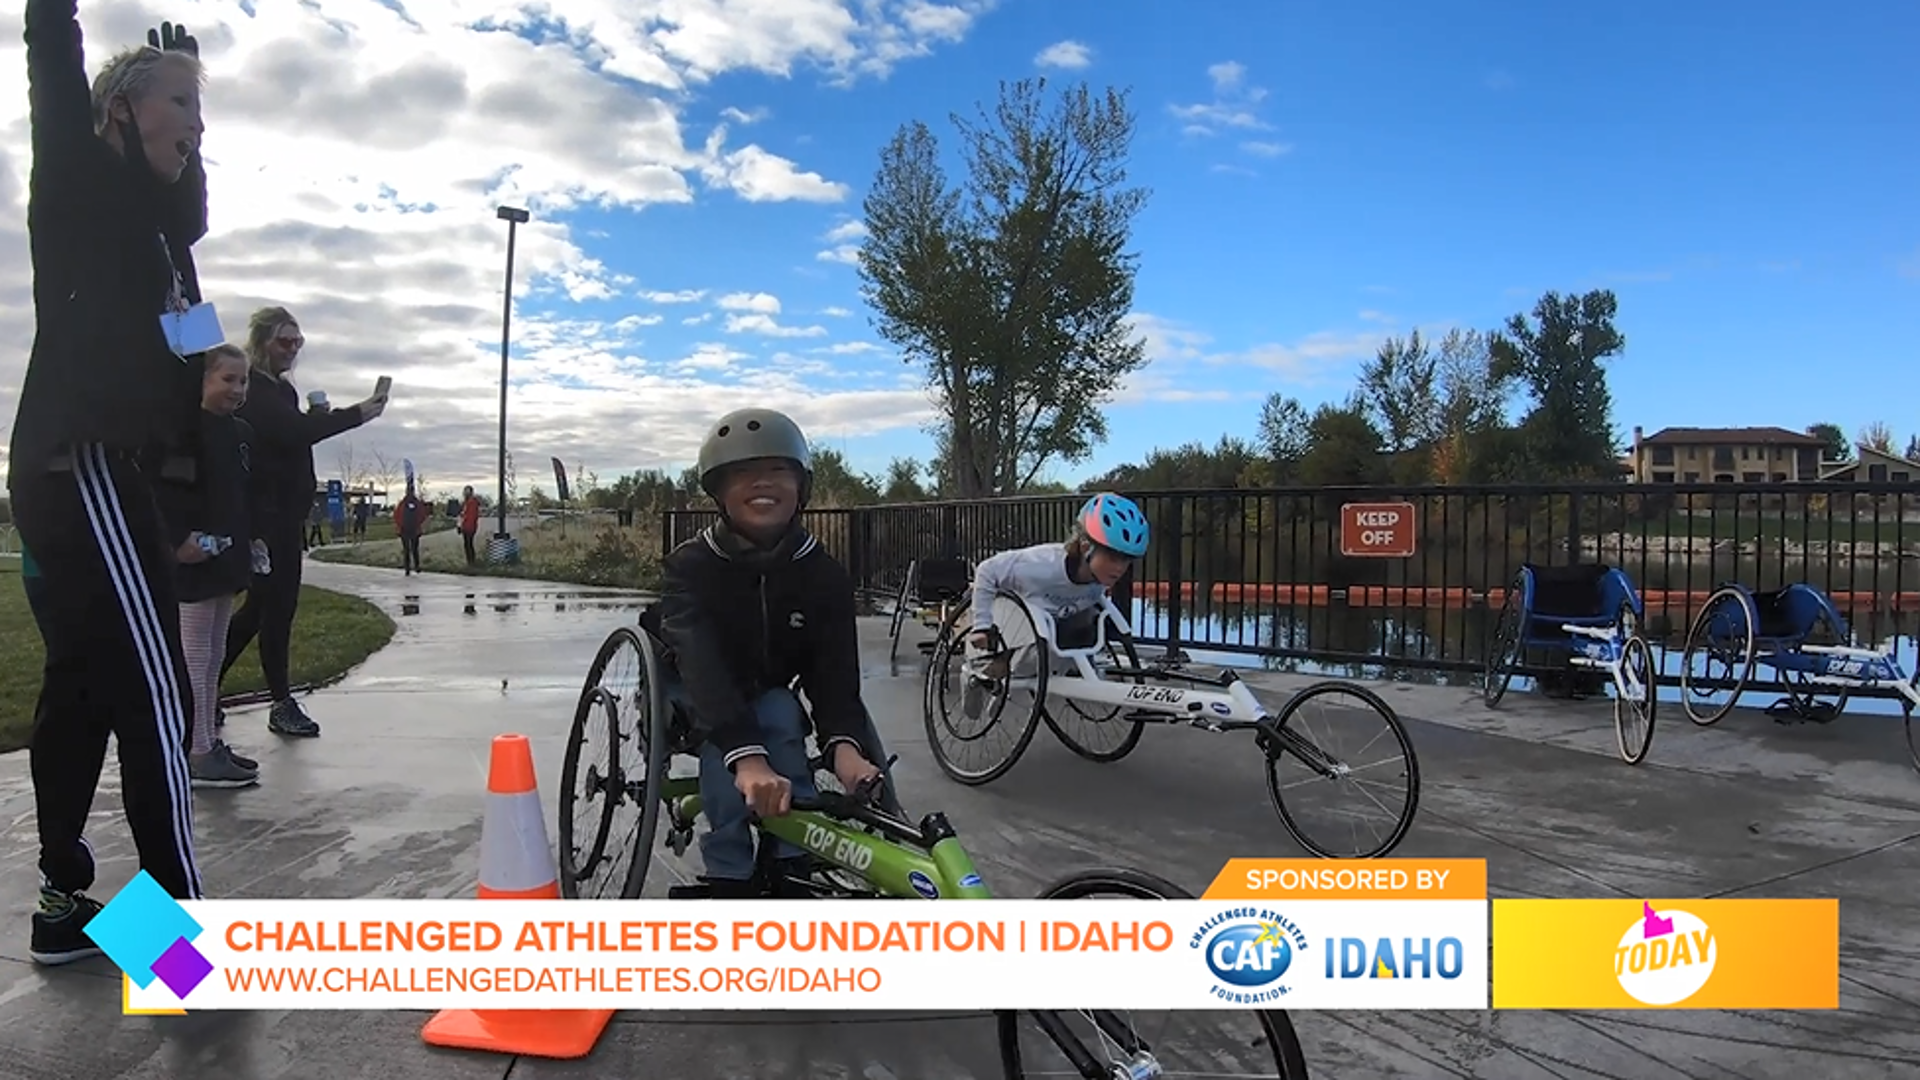 Sponsored by the Challenged Athletes Foundation. CAF empowers athletes to unleash their true potential.